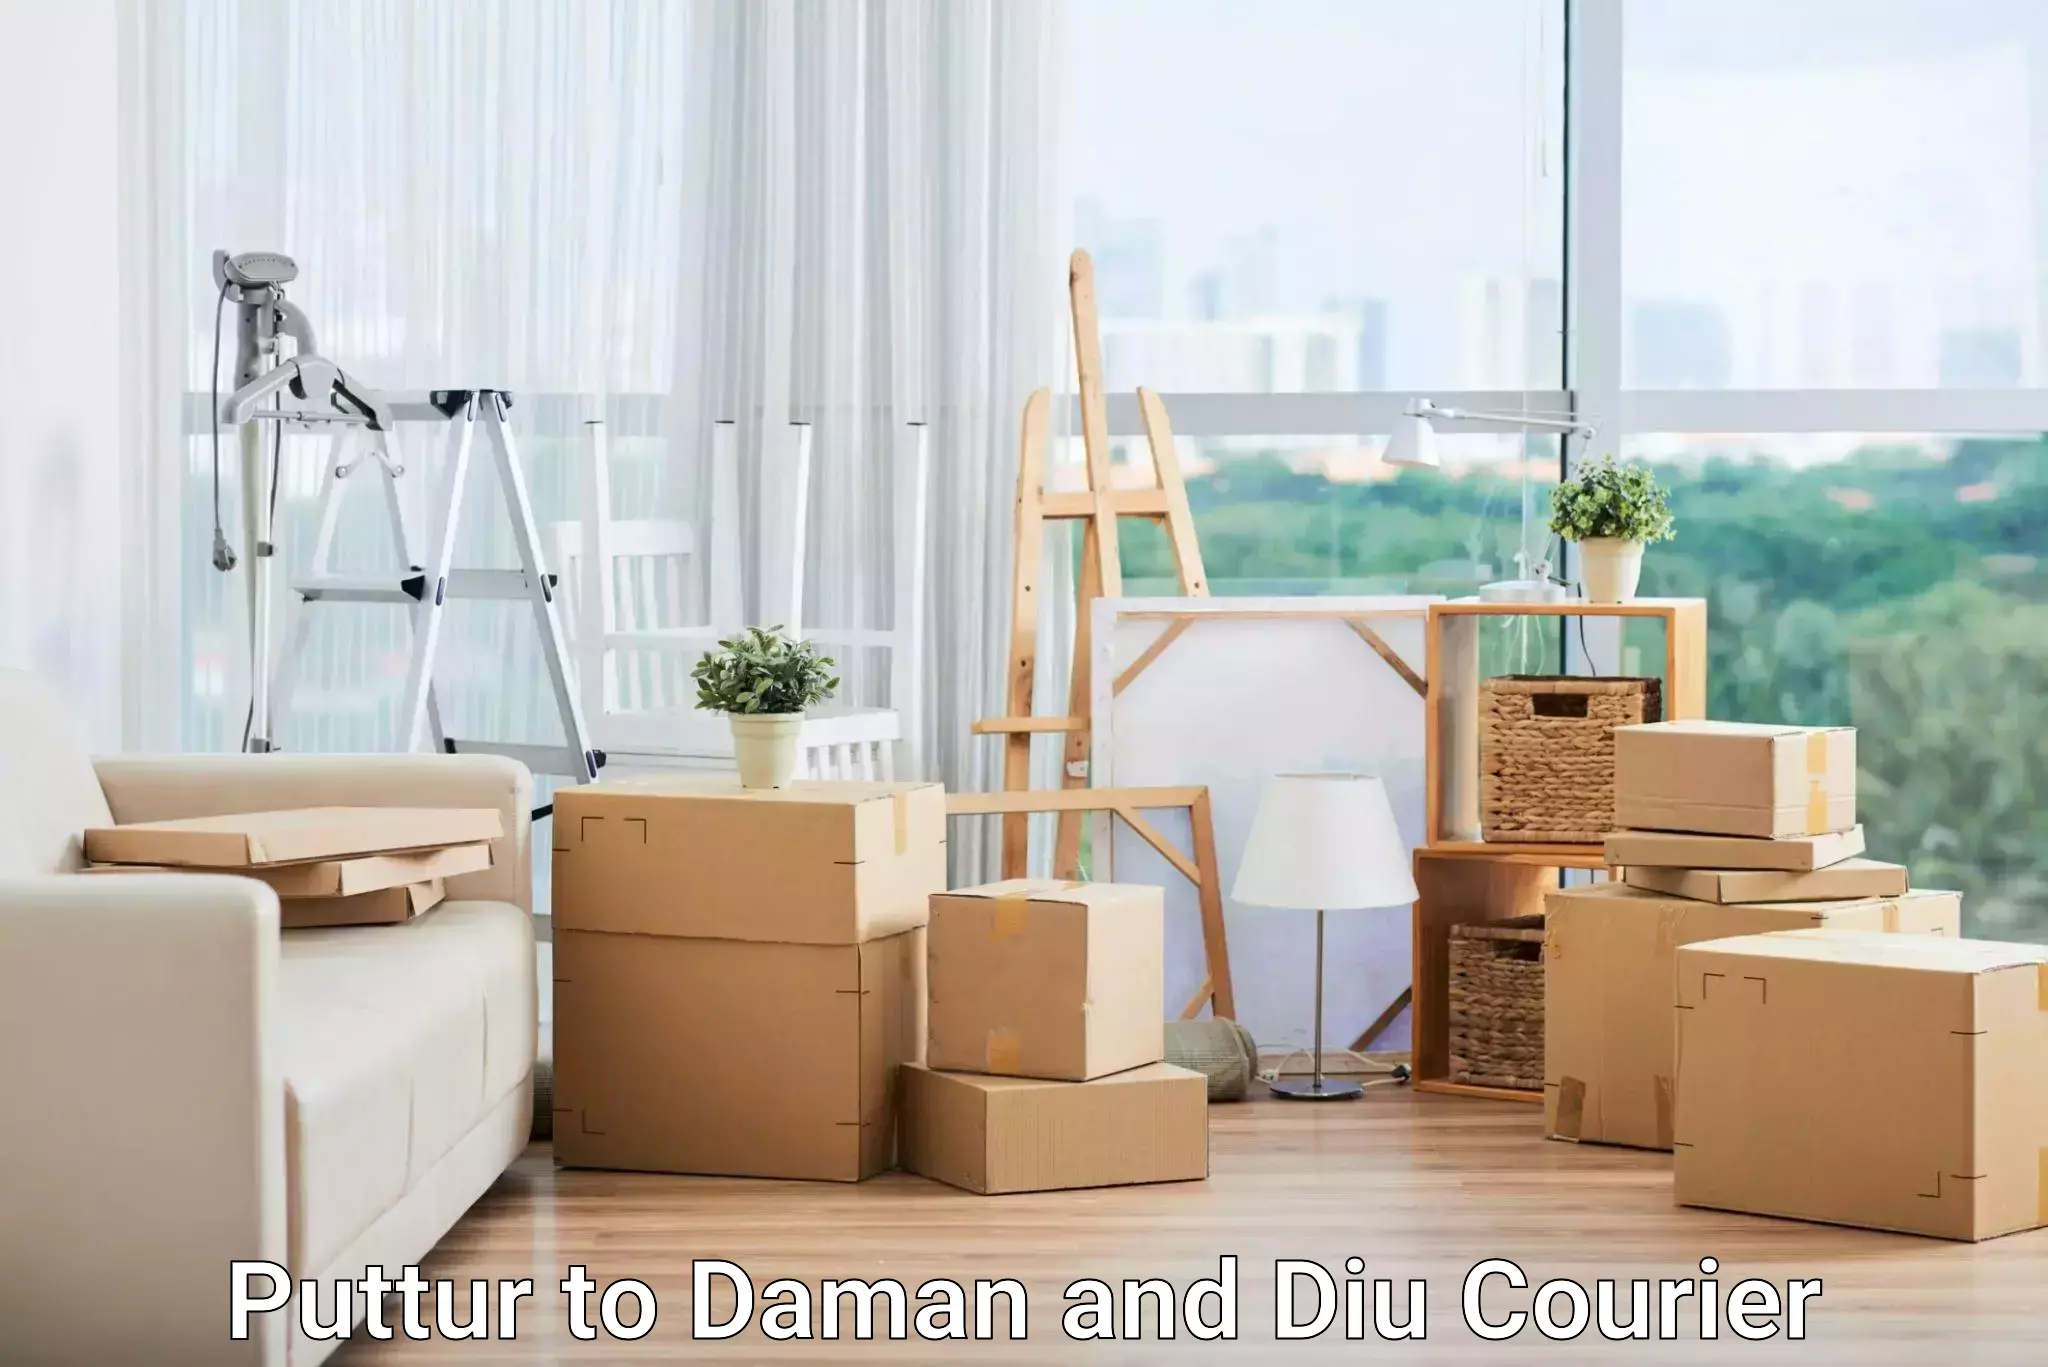 24-hour delivery options Puttur to Daman and Diu